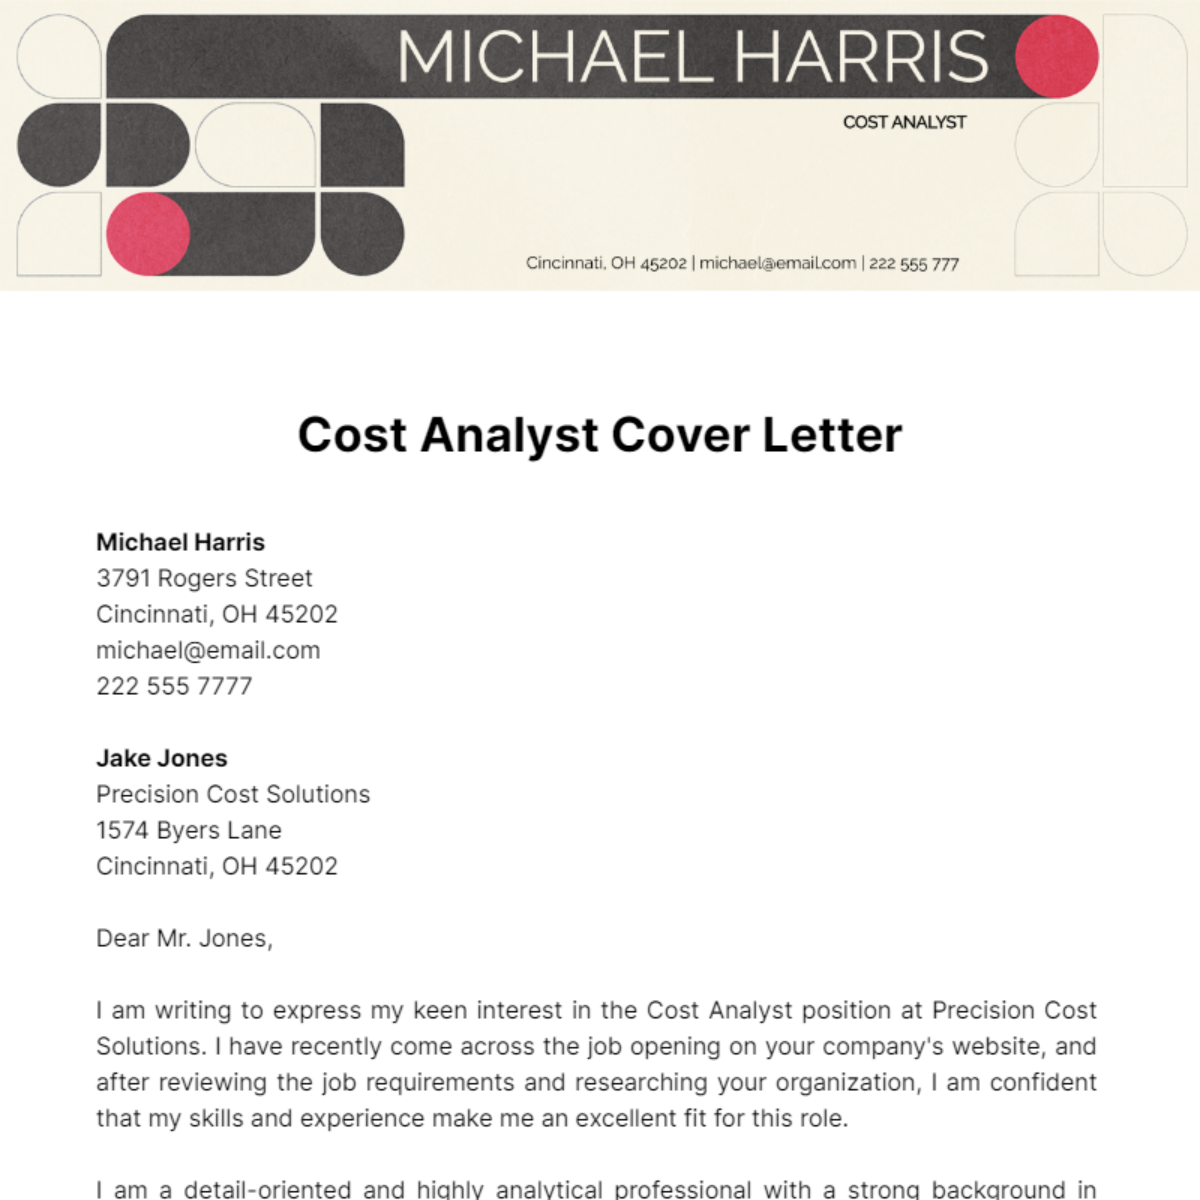 Cost Analyst Cover Letter Template